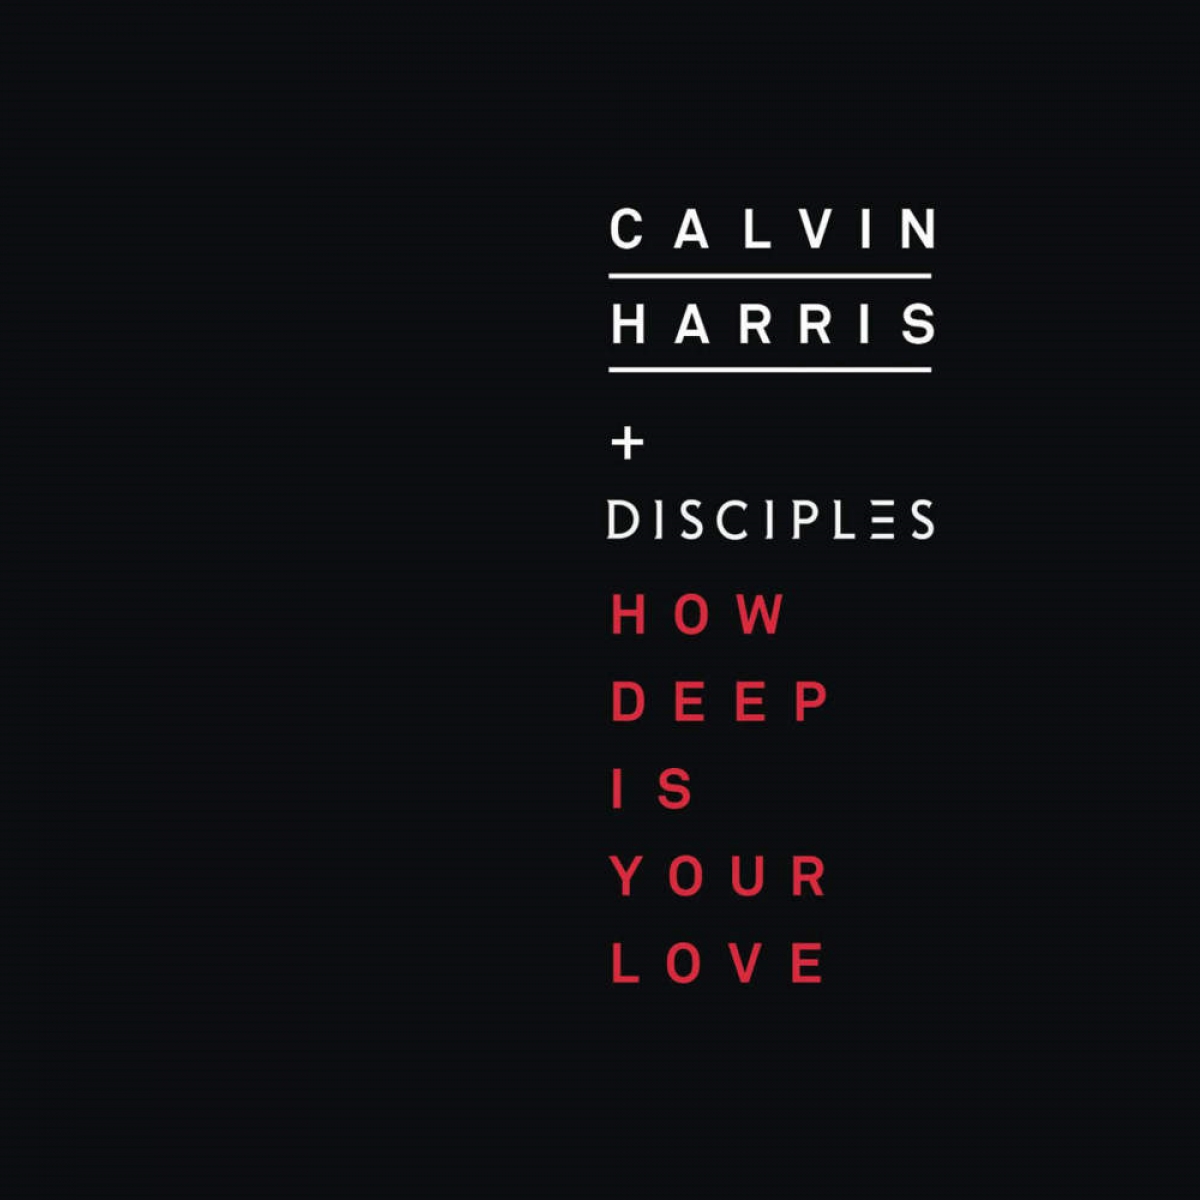 CALVIN HARRIS - How Deep Is Your Love (feat. Disciples)